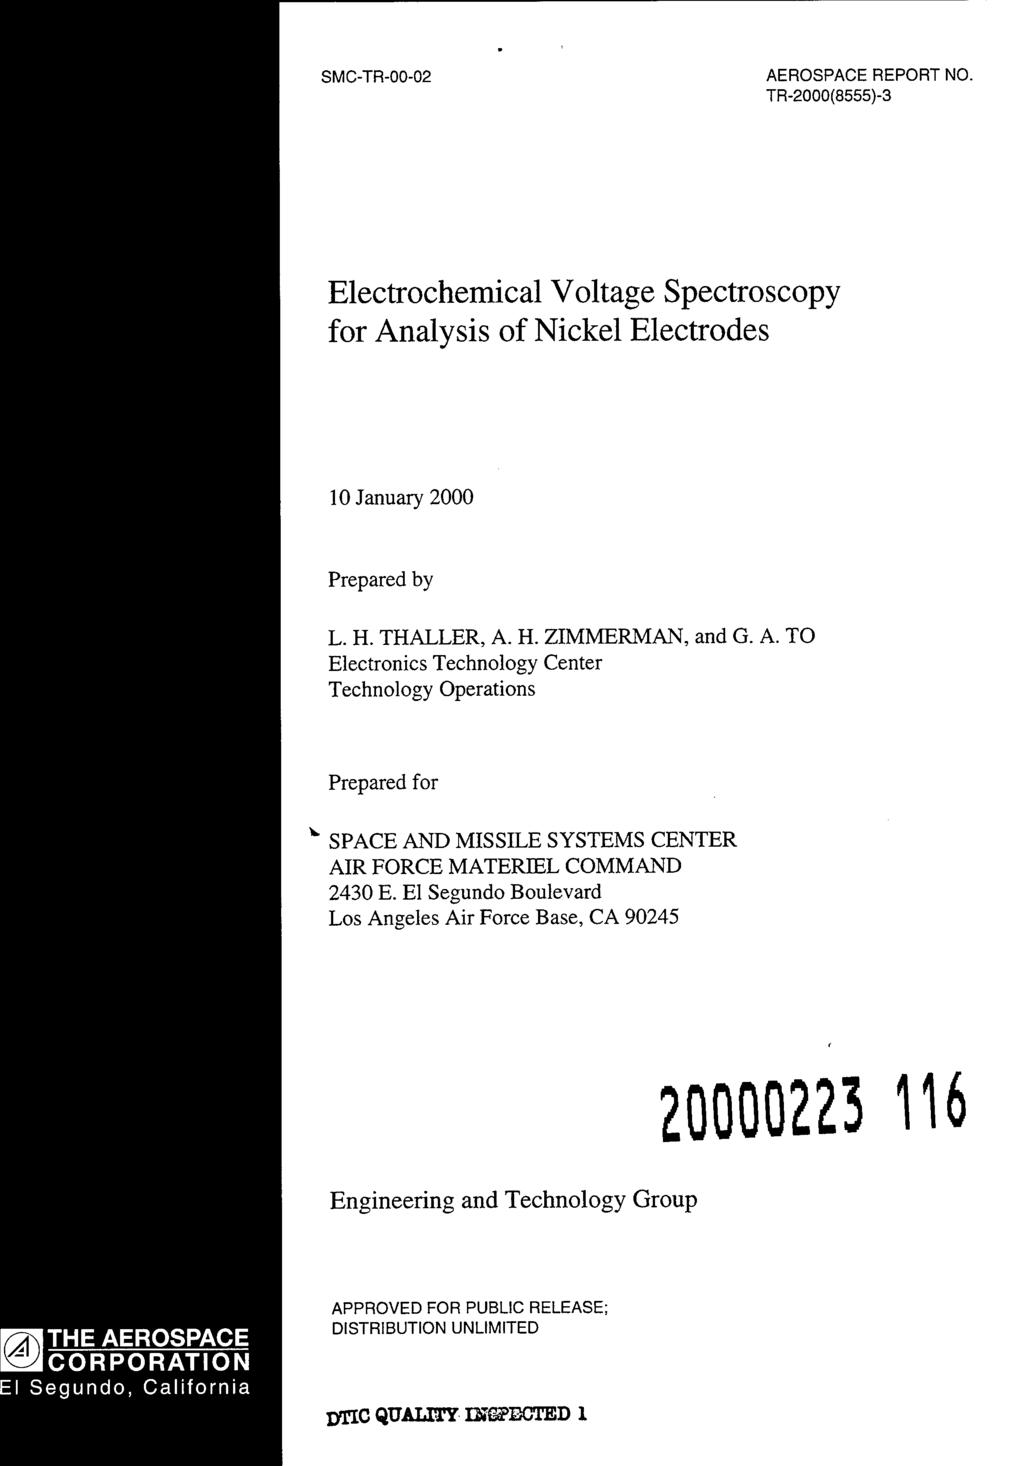 SMC-TR-00-02 AEROSPACE REPORT NO. TR-2000(8555)-3 Electrochemical Voltage Spectroscopy for Analysis of Nickel Electrodes 10 January 2000 Prepared by L. H. THALLER, A. H. ZIMMERMAN, and G. A. TO Electronics Technology Center Technology Operations Prepared for v SPACE AND MISSILE SYSTEMS CENTER AIR FORCE MATERIEL COMMAND 2430 E.